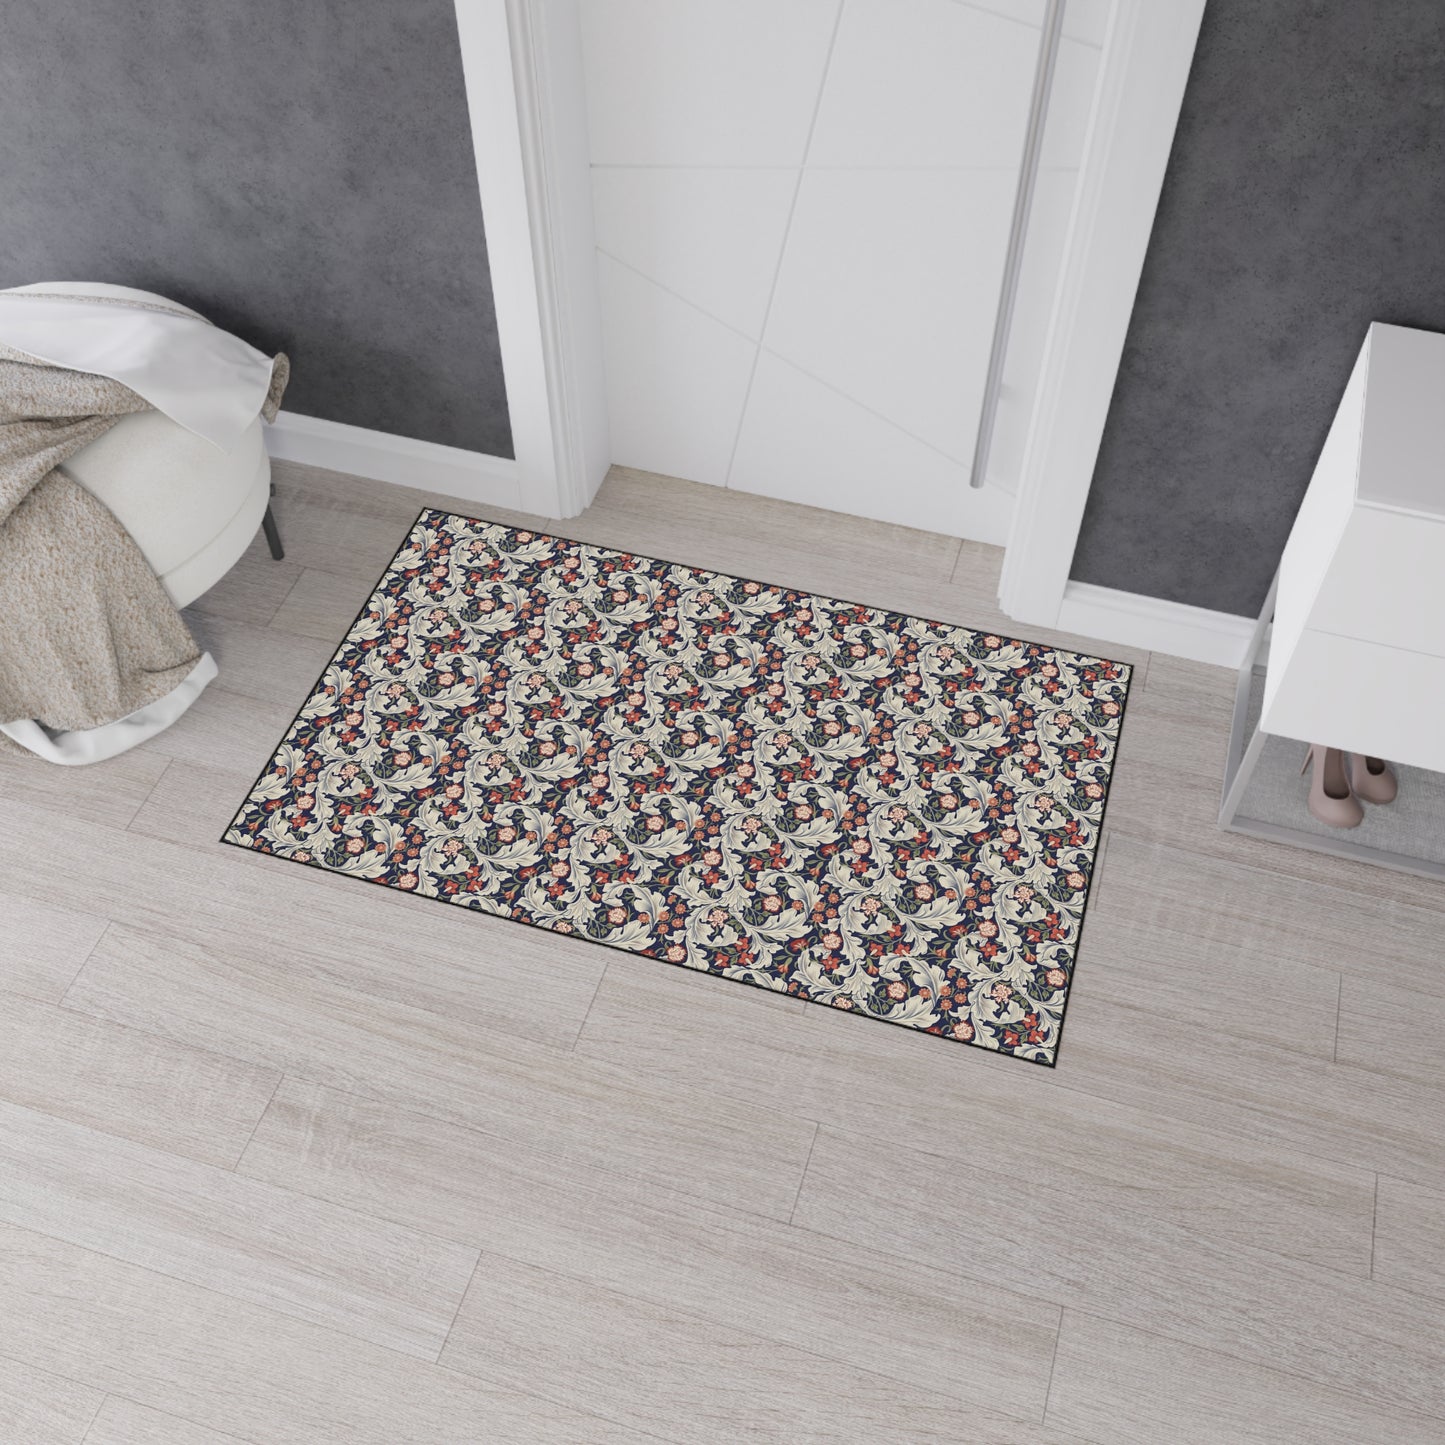 william-morris-co-heavy-duty-floor-mat-leicester-collection-royal-17